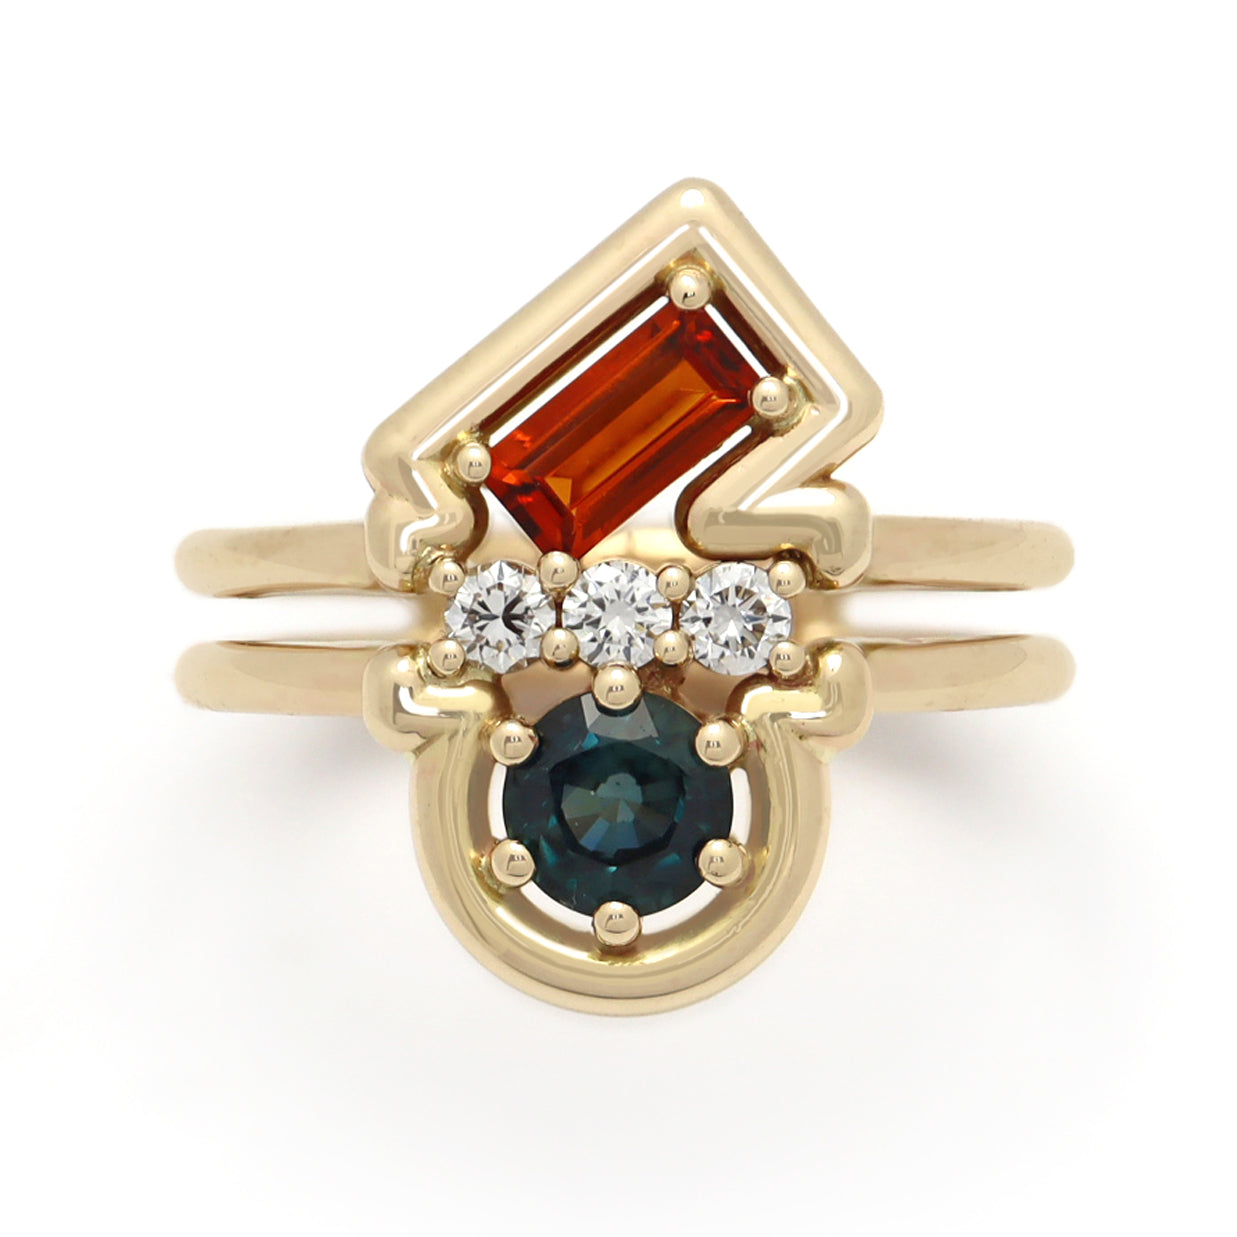 Petra 14kt yellow gold sapphire and diamond ring